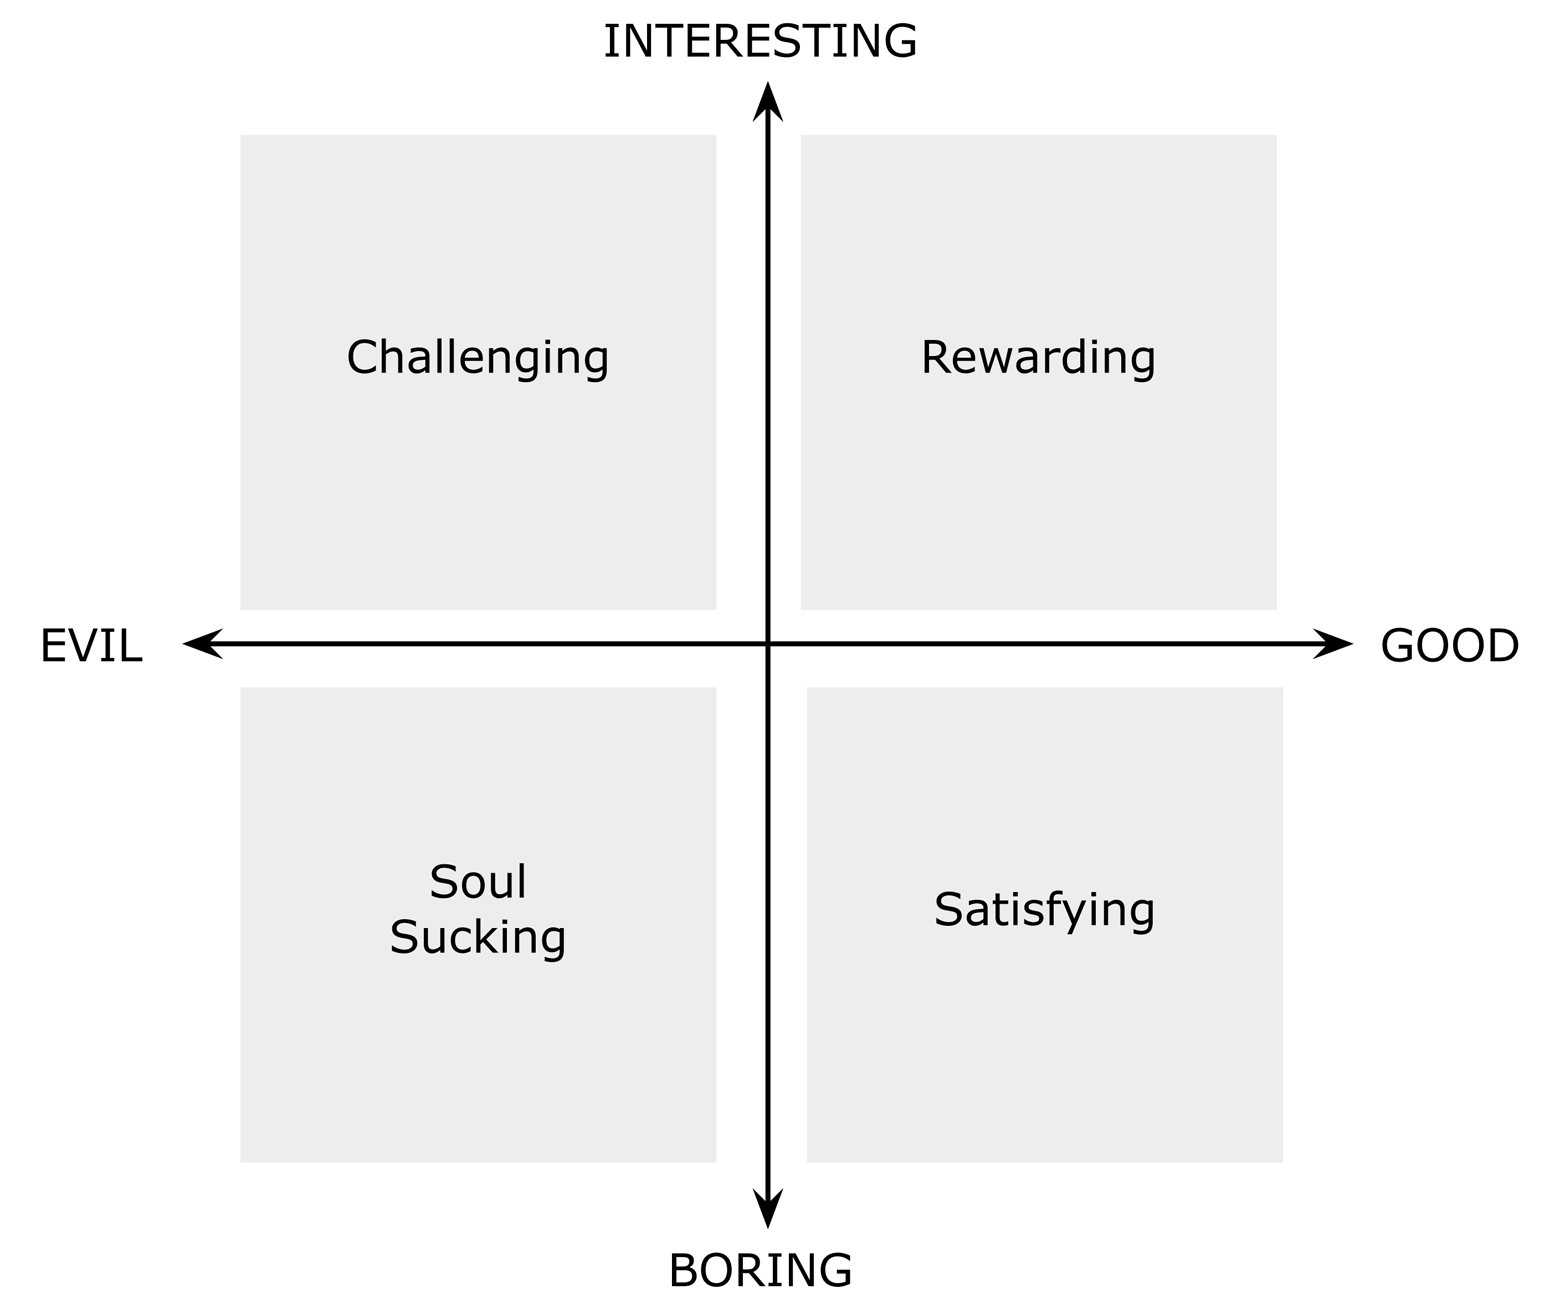 Quick quiz: For you, what design work would fall into each of the four quadrants?